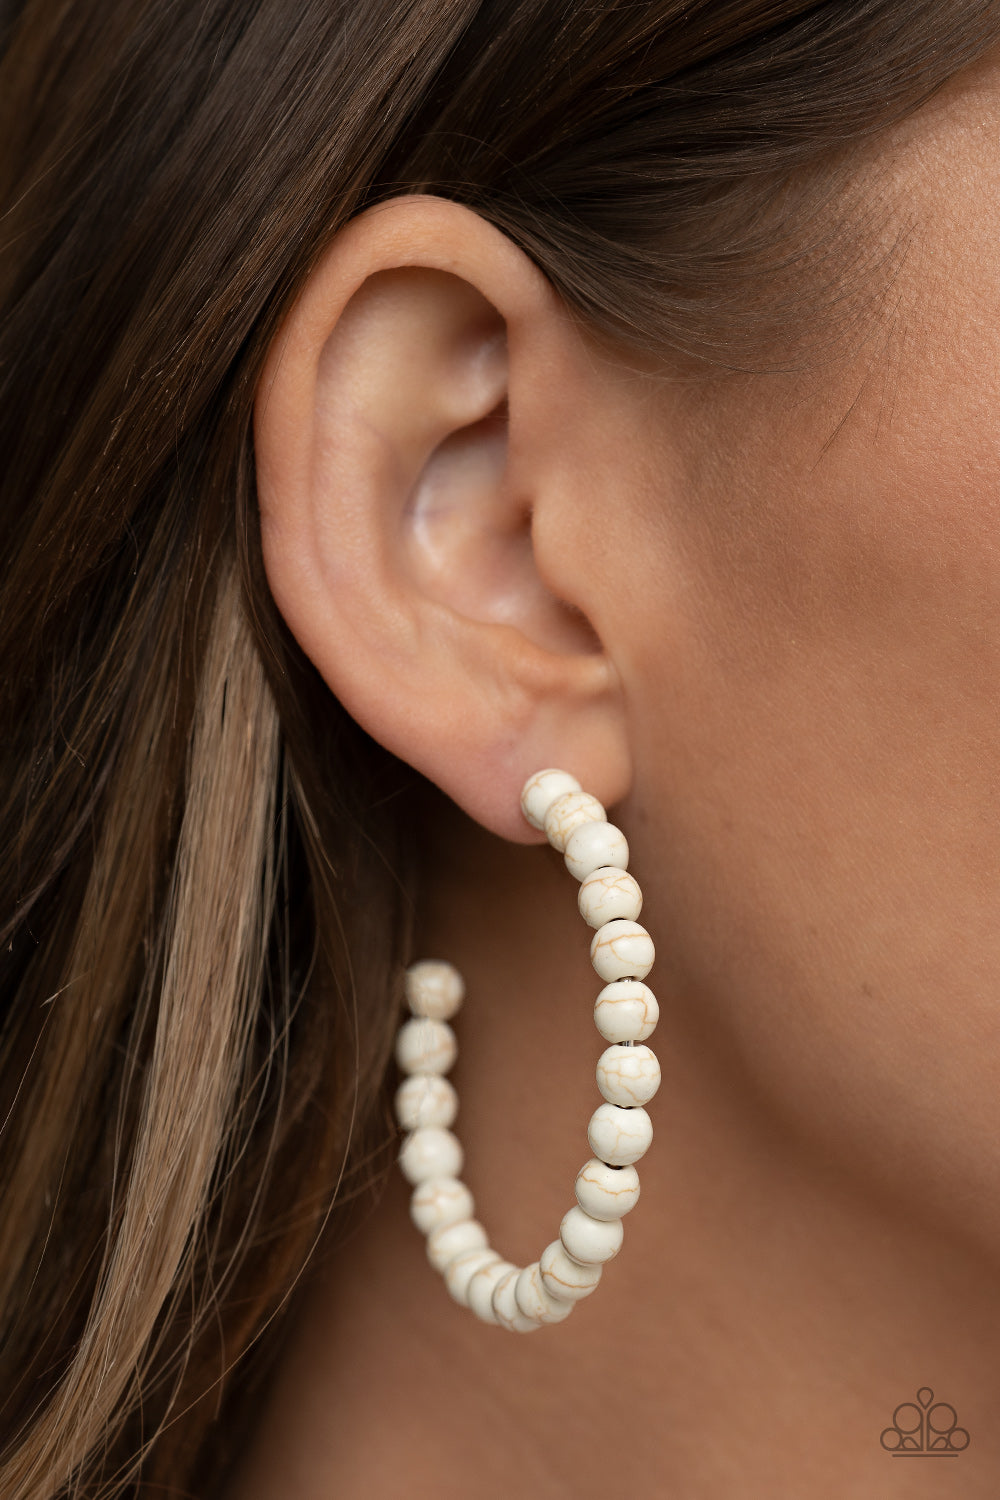 Earthy white stone beads are threaded along a dainty wire hoop, resulting in an earthy flair. Earring attaches to a standard post fitting. Hoop measures approximately 2